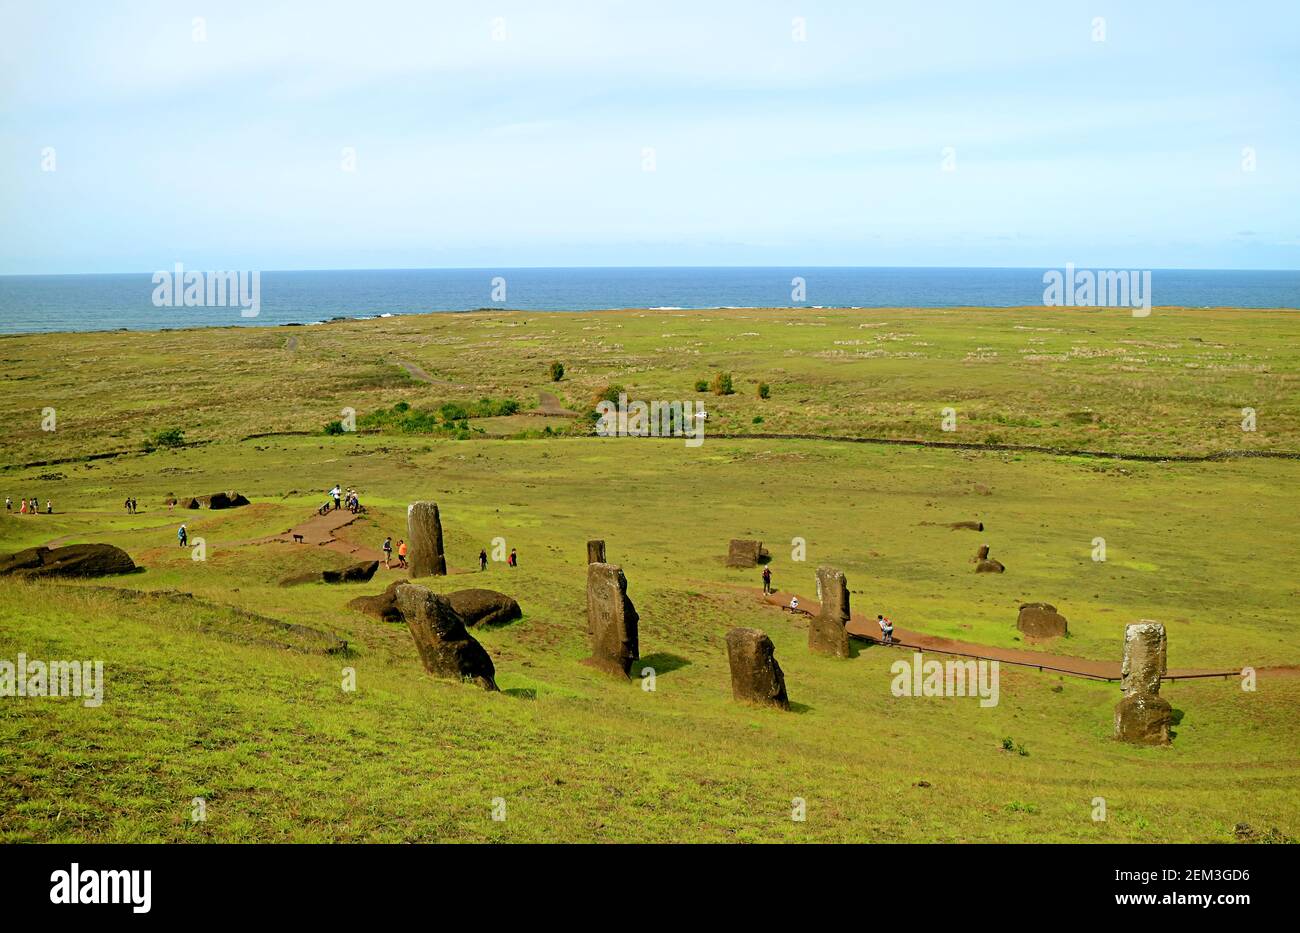 Group of Visitors visiting the site of abandoned unfinished giant Moai statues at Rano Raraku volcano with Pacific ocean in backdrop, Easter Island, C Stock Photo